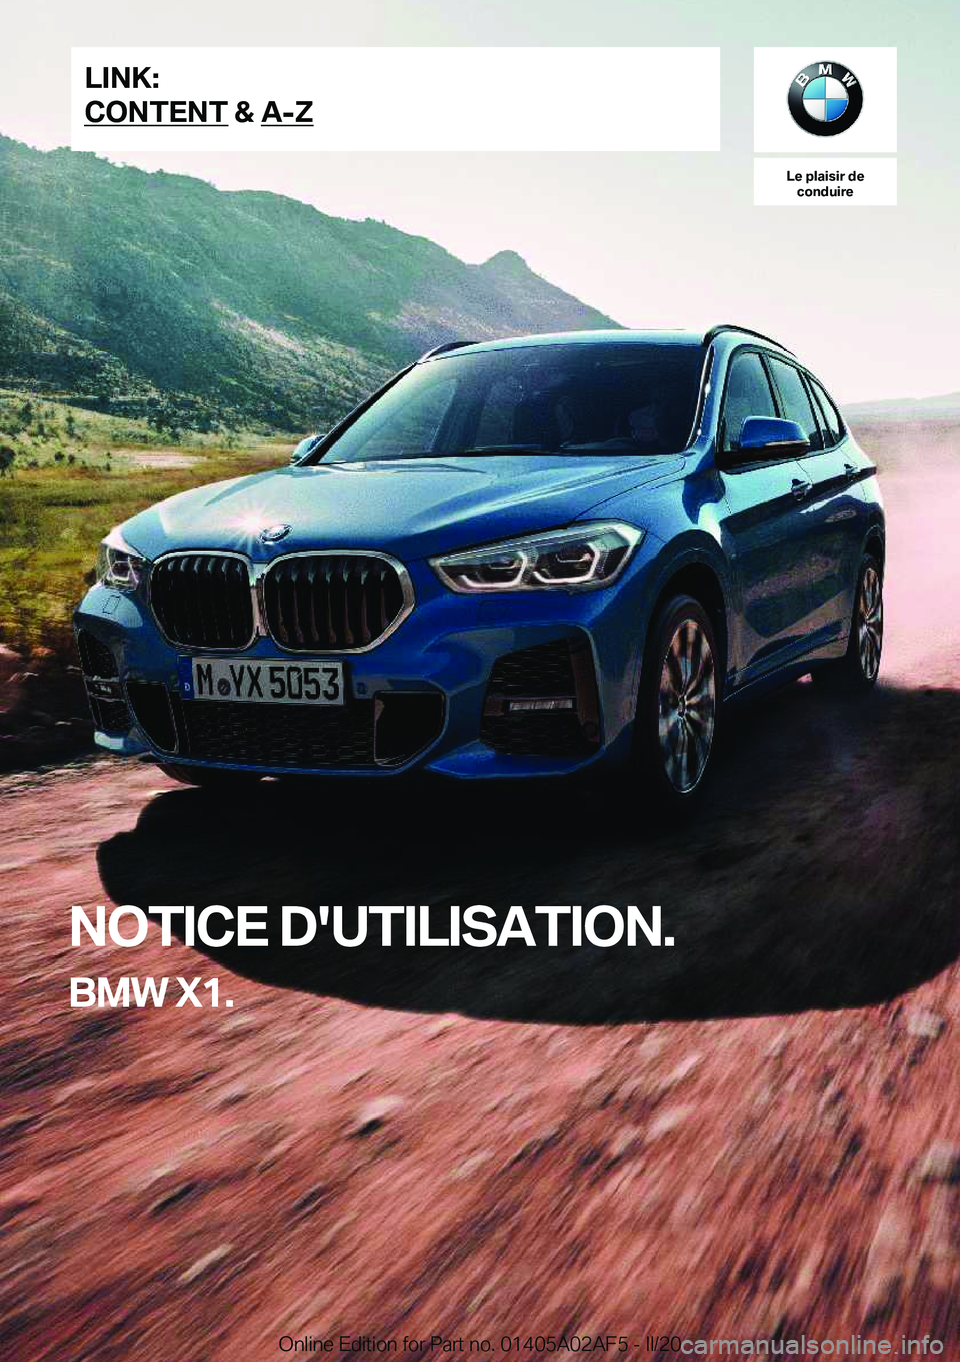 BMW X1 2020  Notices Demploi (in French) �L�e��p�l�a�i�s�i�r��d�e�c�o�n�d�u�i�r�e
�N�O�T�I�C�E��D�'�U�T�I�L�I�S�A�T�I�O�N�.
�B�M�W��X�1�.�L�I�N�K�:
�C�O�N�T�E�N�T��&��A�-�Z�O�n�l�i�n�e��E�d�i�t�i�o�n��f�o�r��P�a�r�t��n�o�.��0�